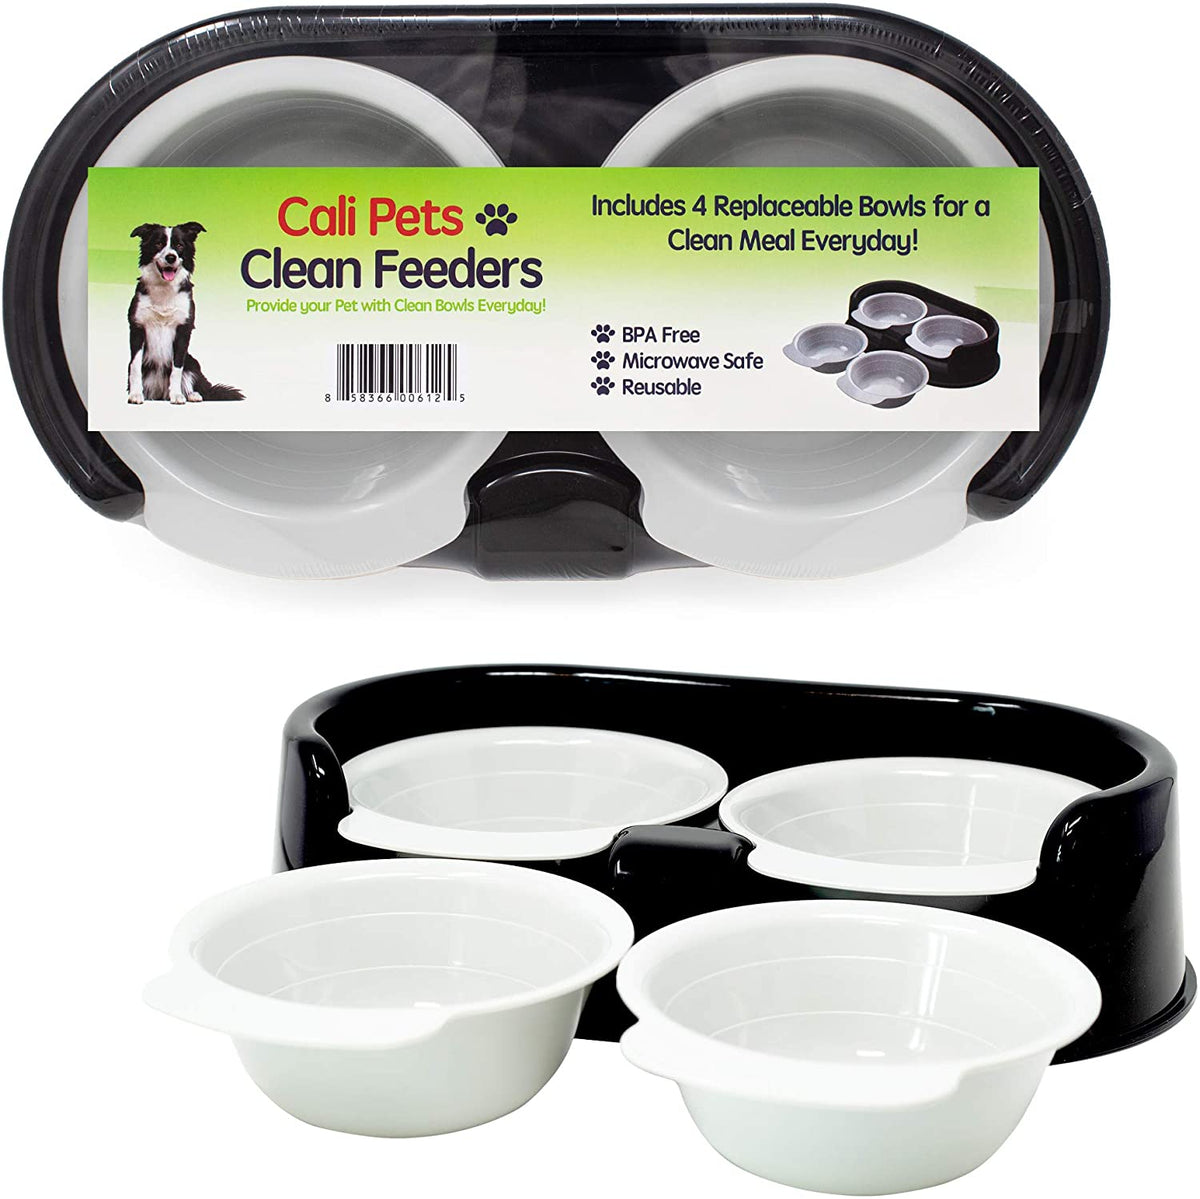 Cali Pets Clean Feeder Pet Bowls with Stand, Large (1.5 - 4 cup) - Rapid Brands